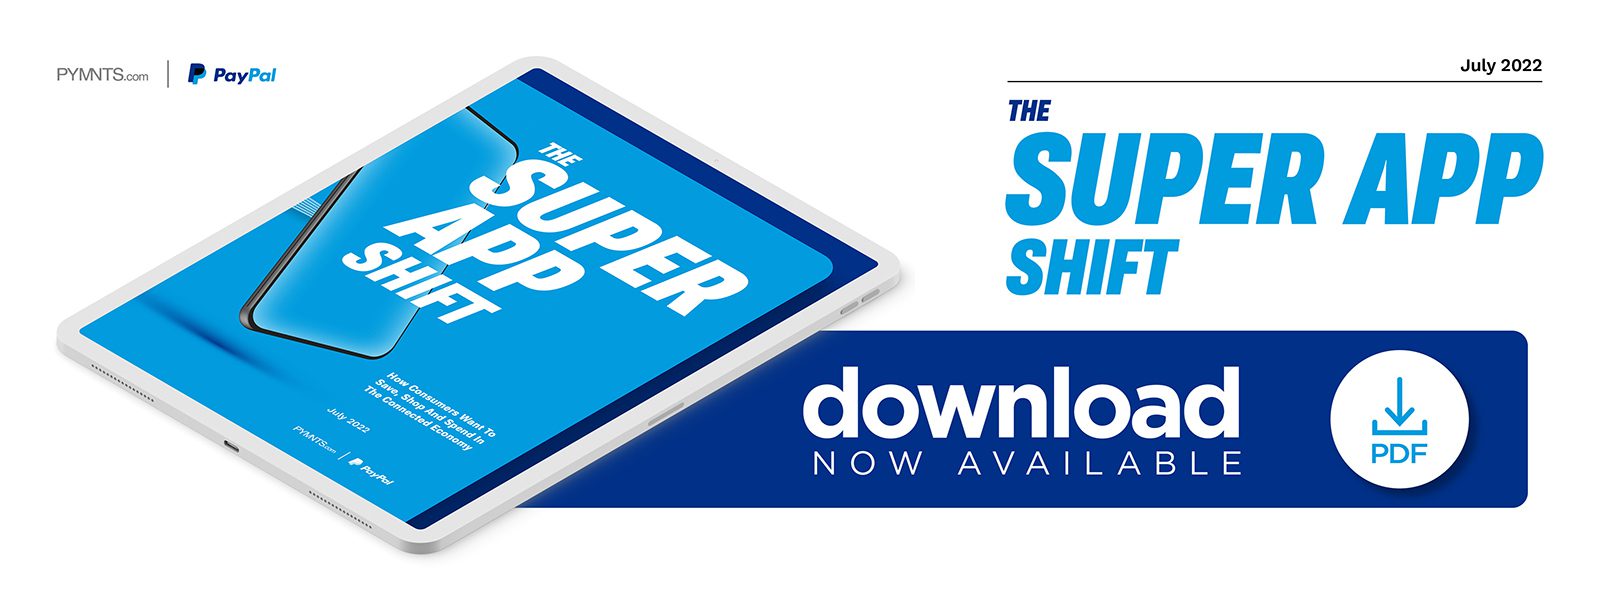 PayPal - The Super App Shift: How Consumers Want To Save, Shop And Spend In The Connected Economy - July 2022 - Discover why consumers see a super app as a solution for modern living